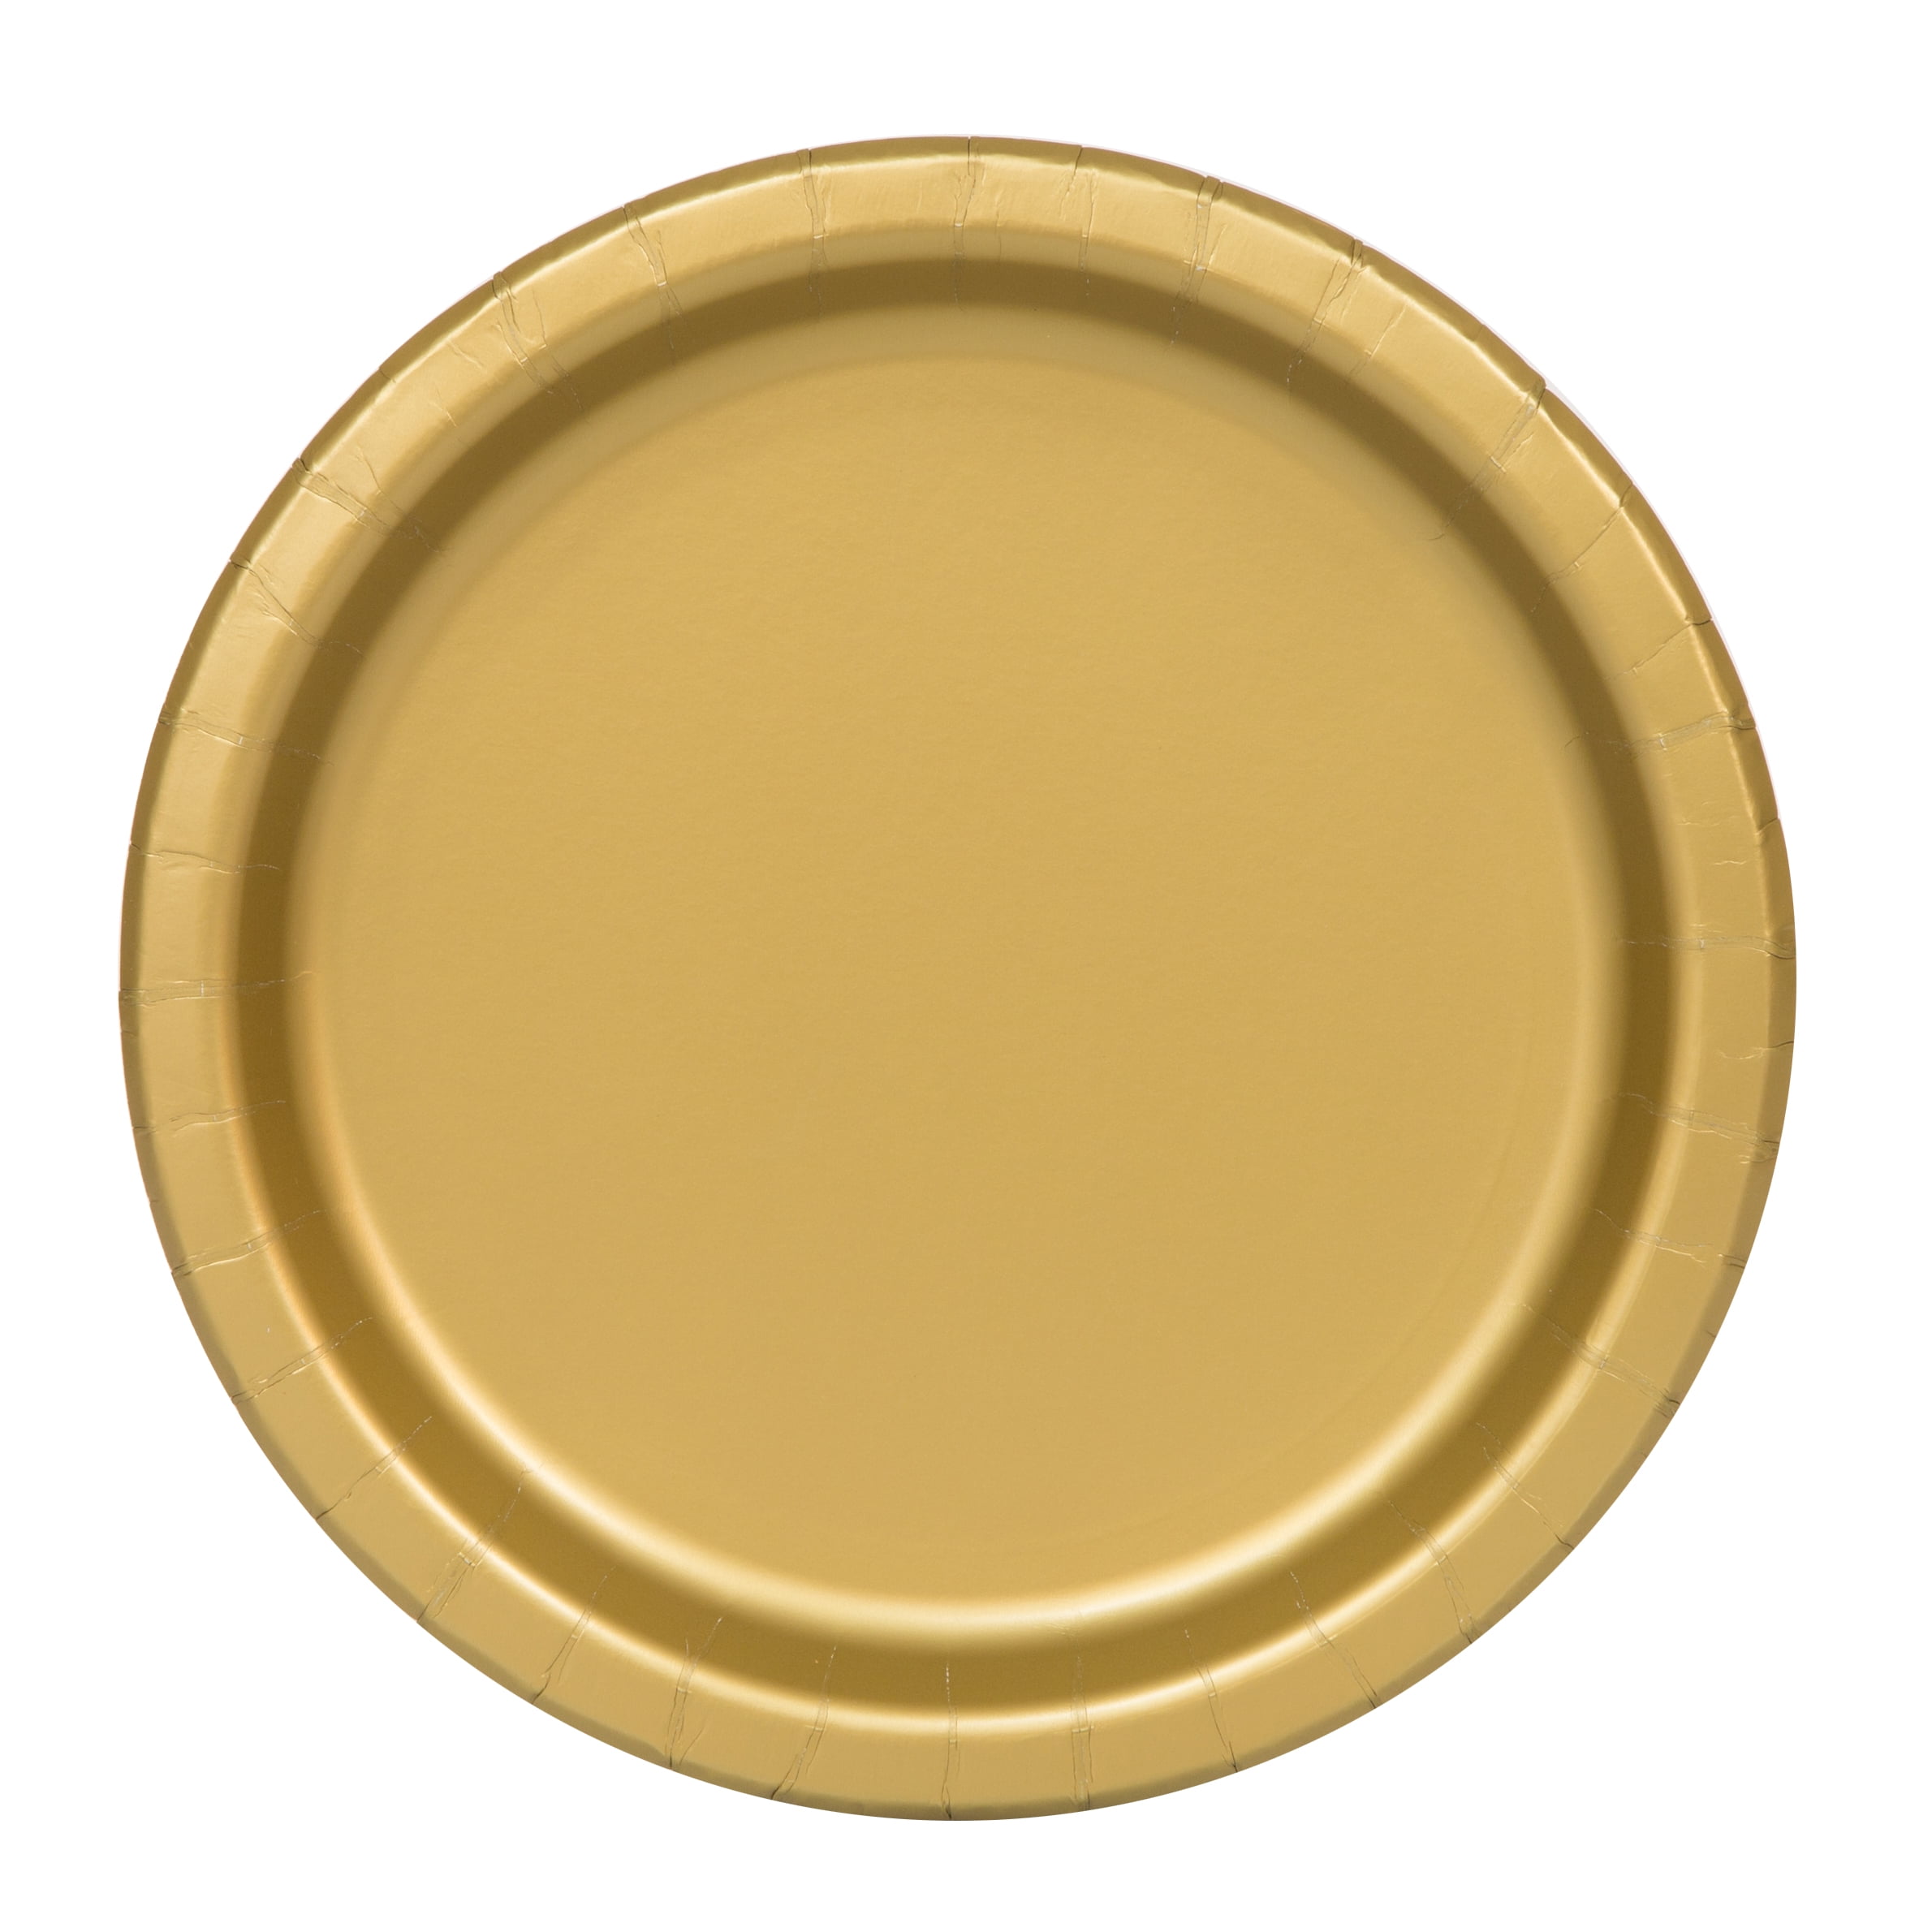 Gold Label Coated Paper Plates, 9 in., 1 - Foods Co.